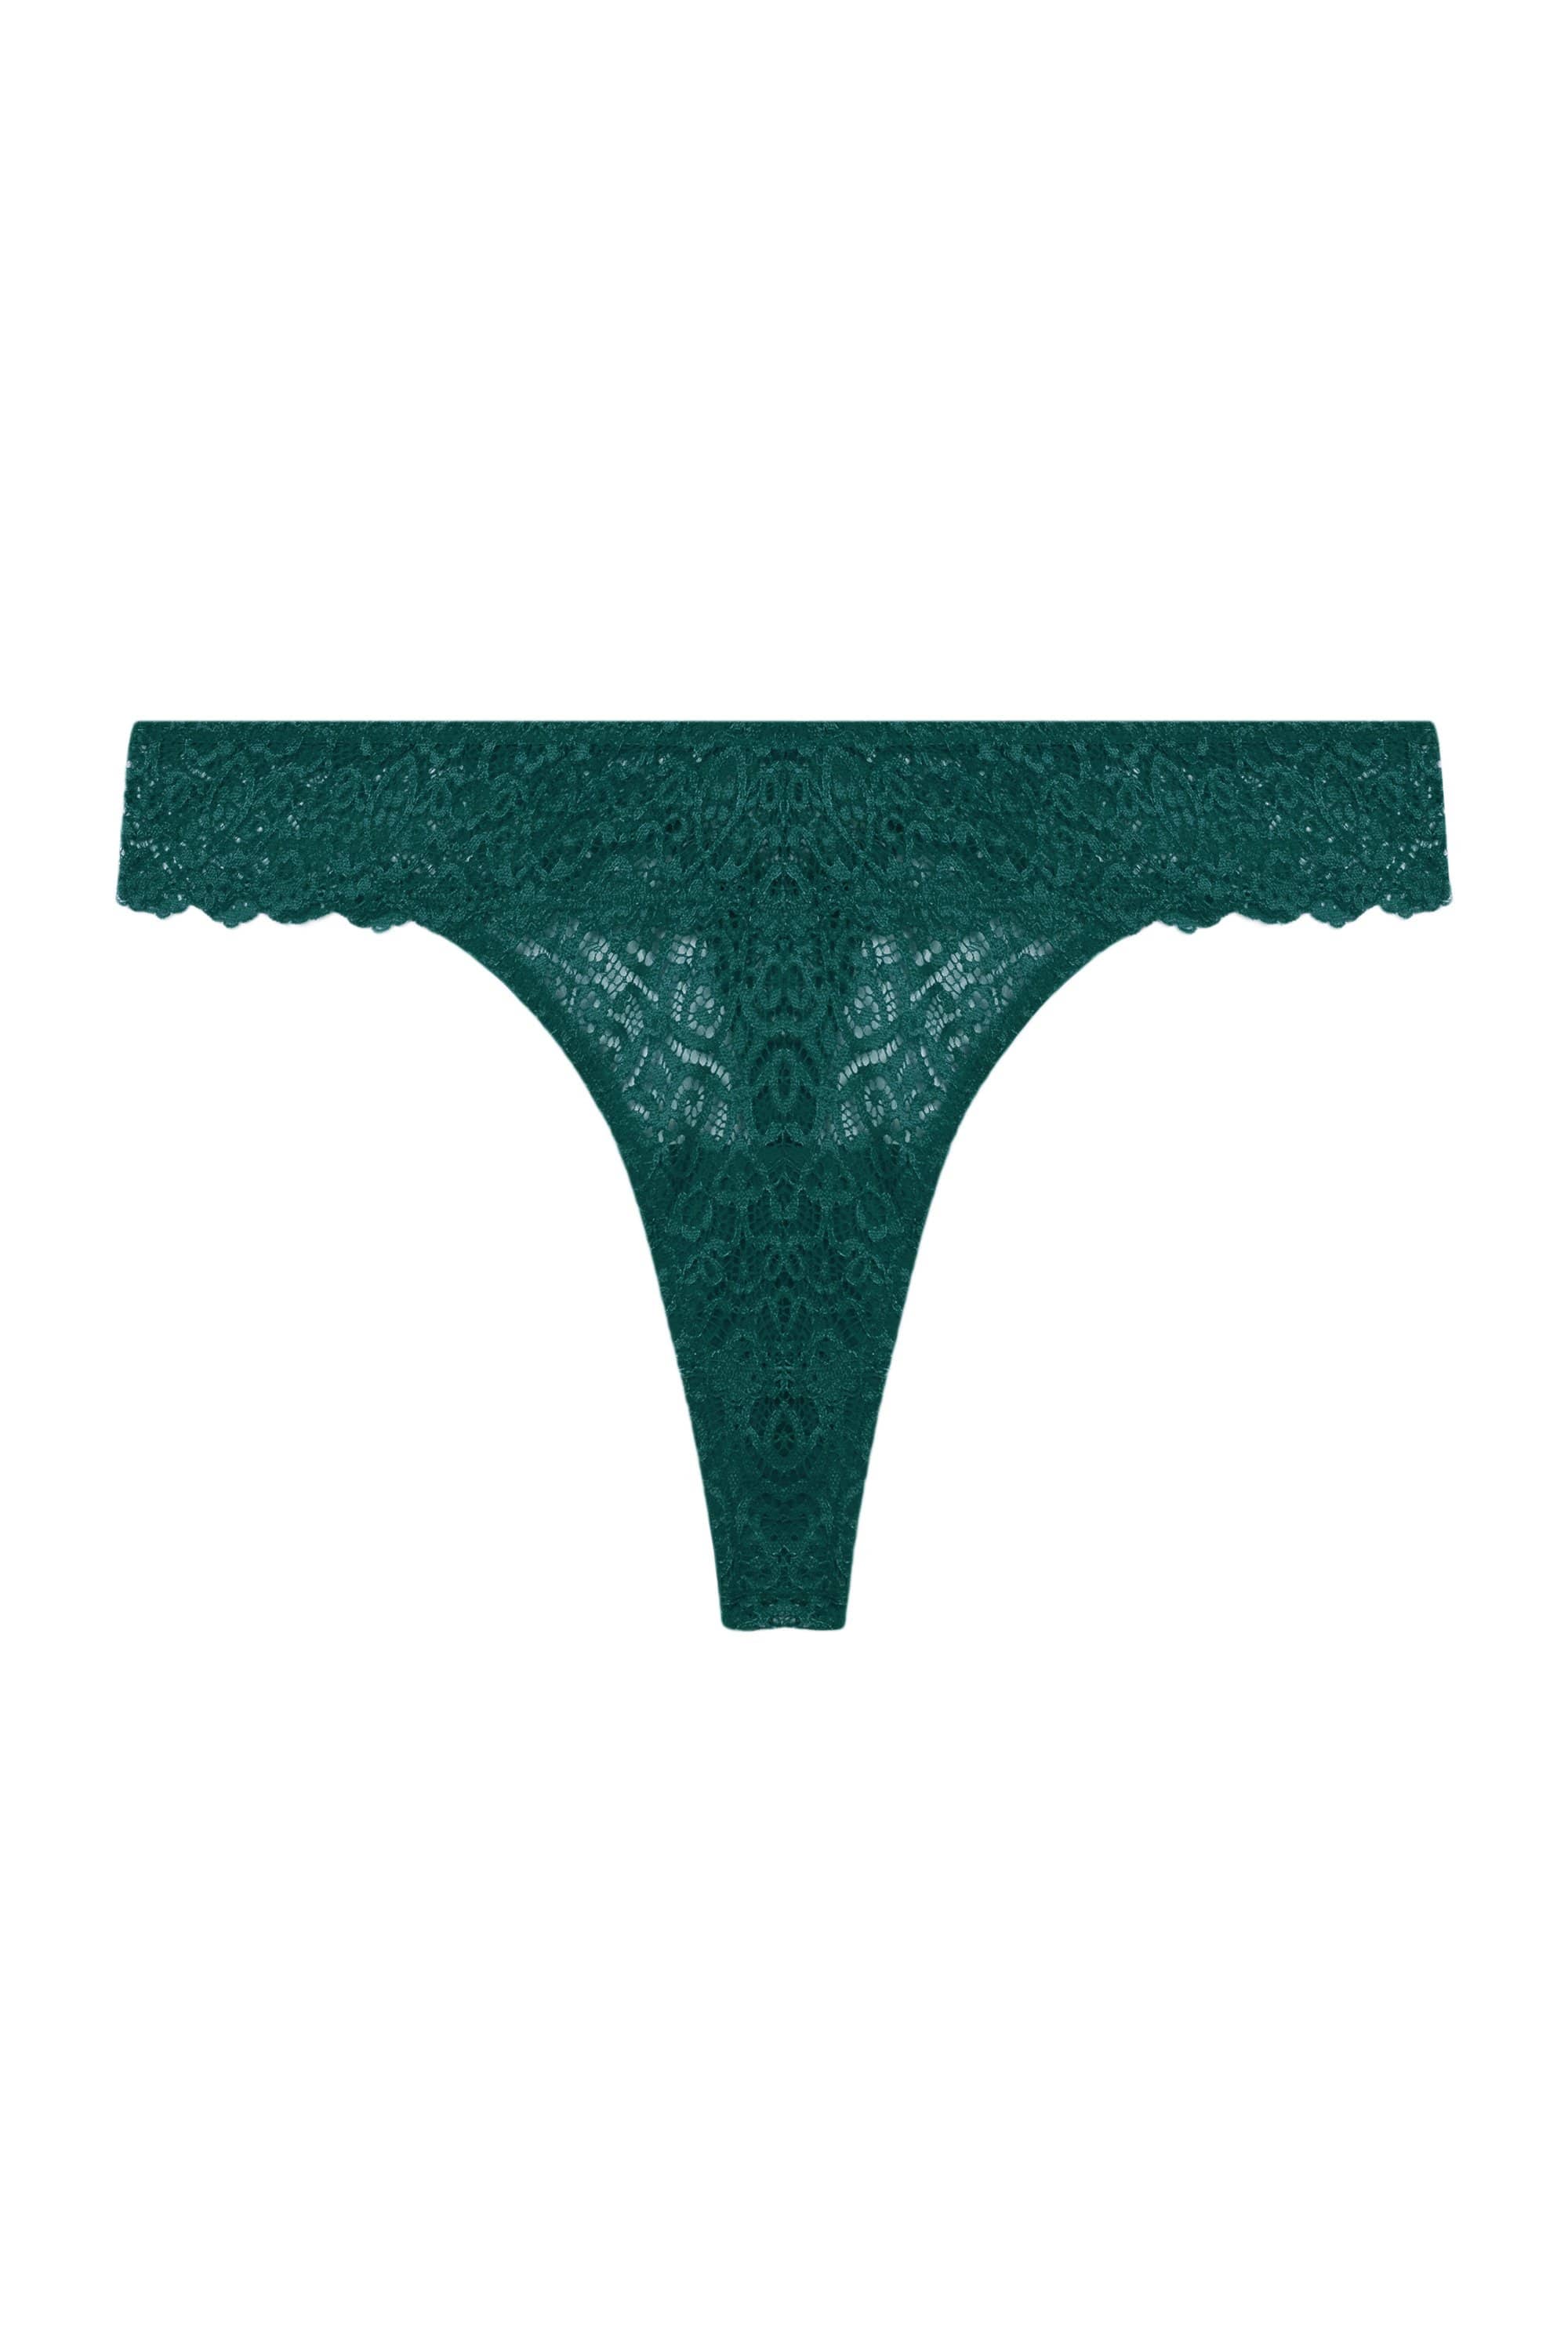 Ariana Teal Everyday Lace Thong